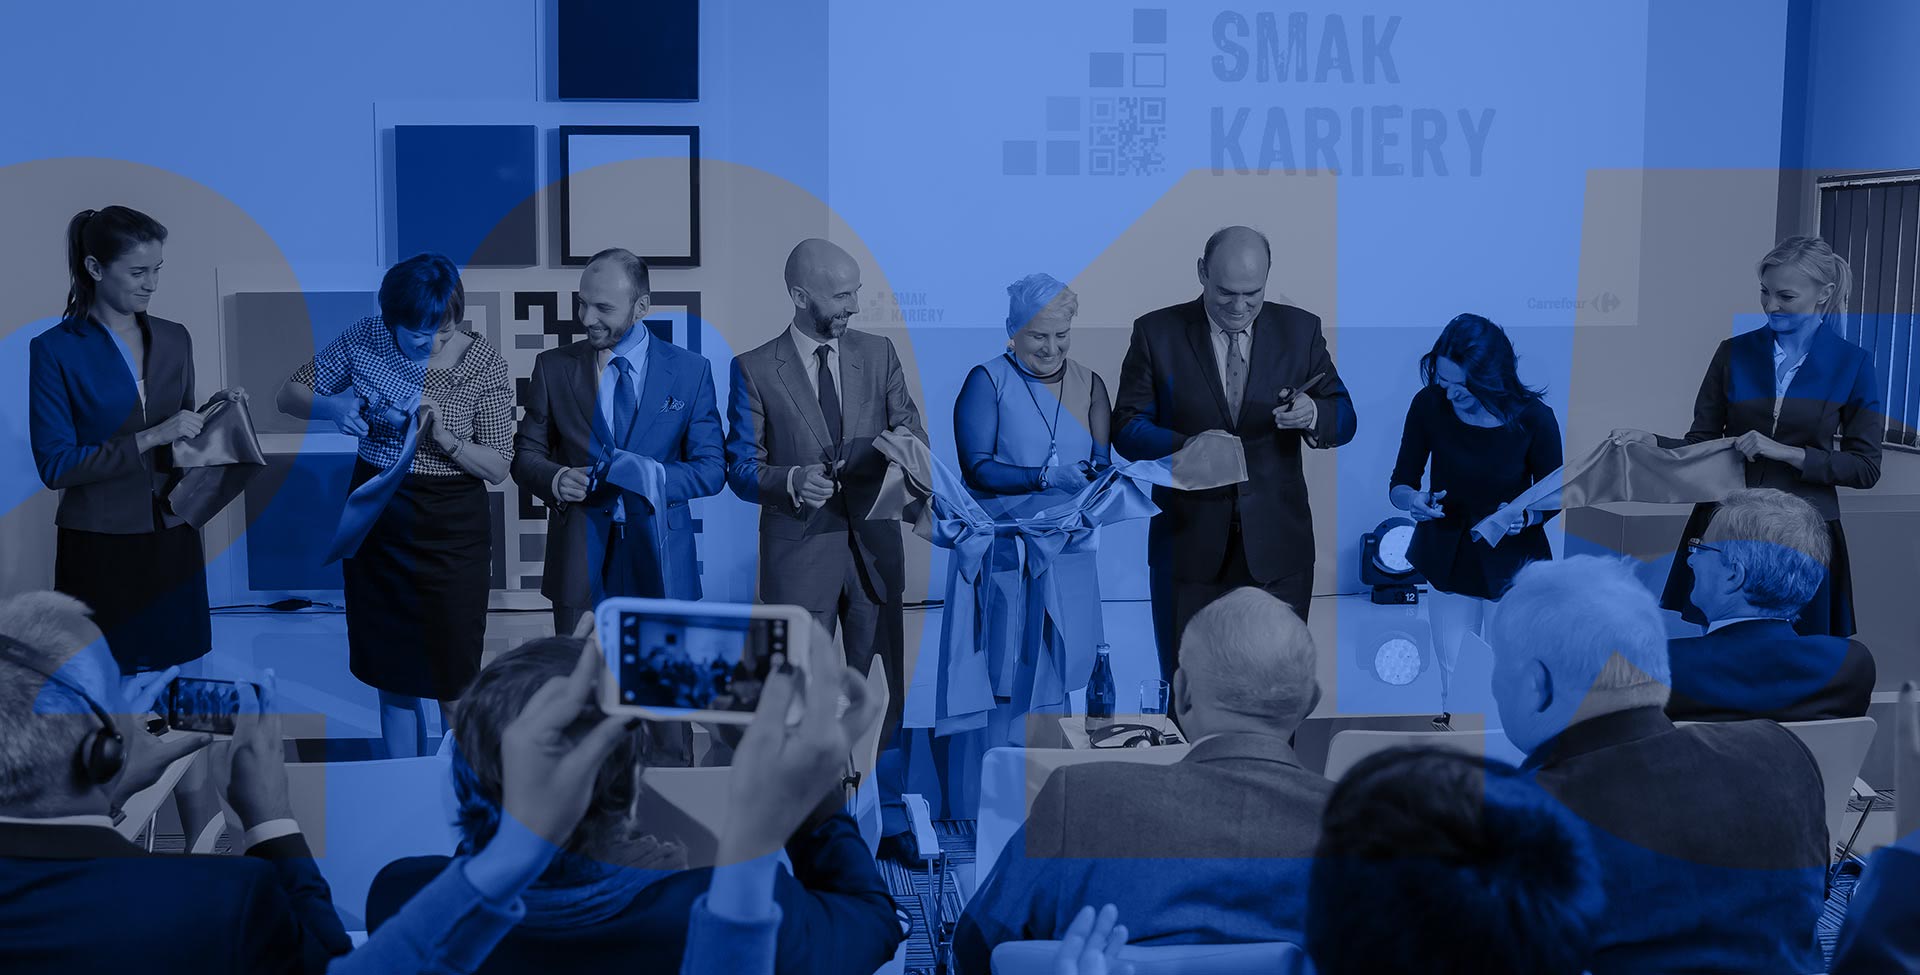 The Training and Conference Centre "Smak Kariery" was opened.